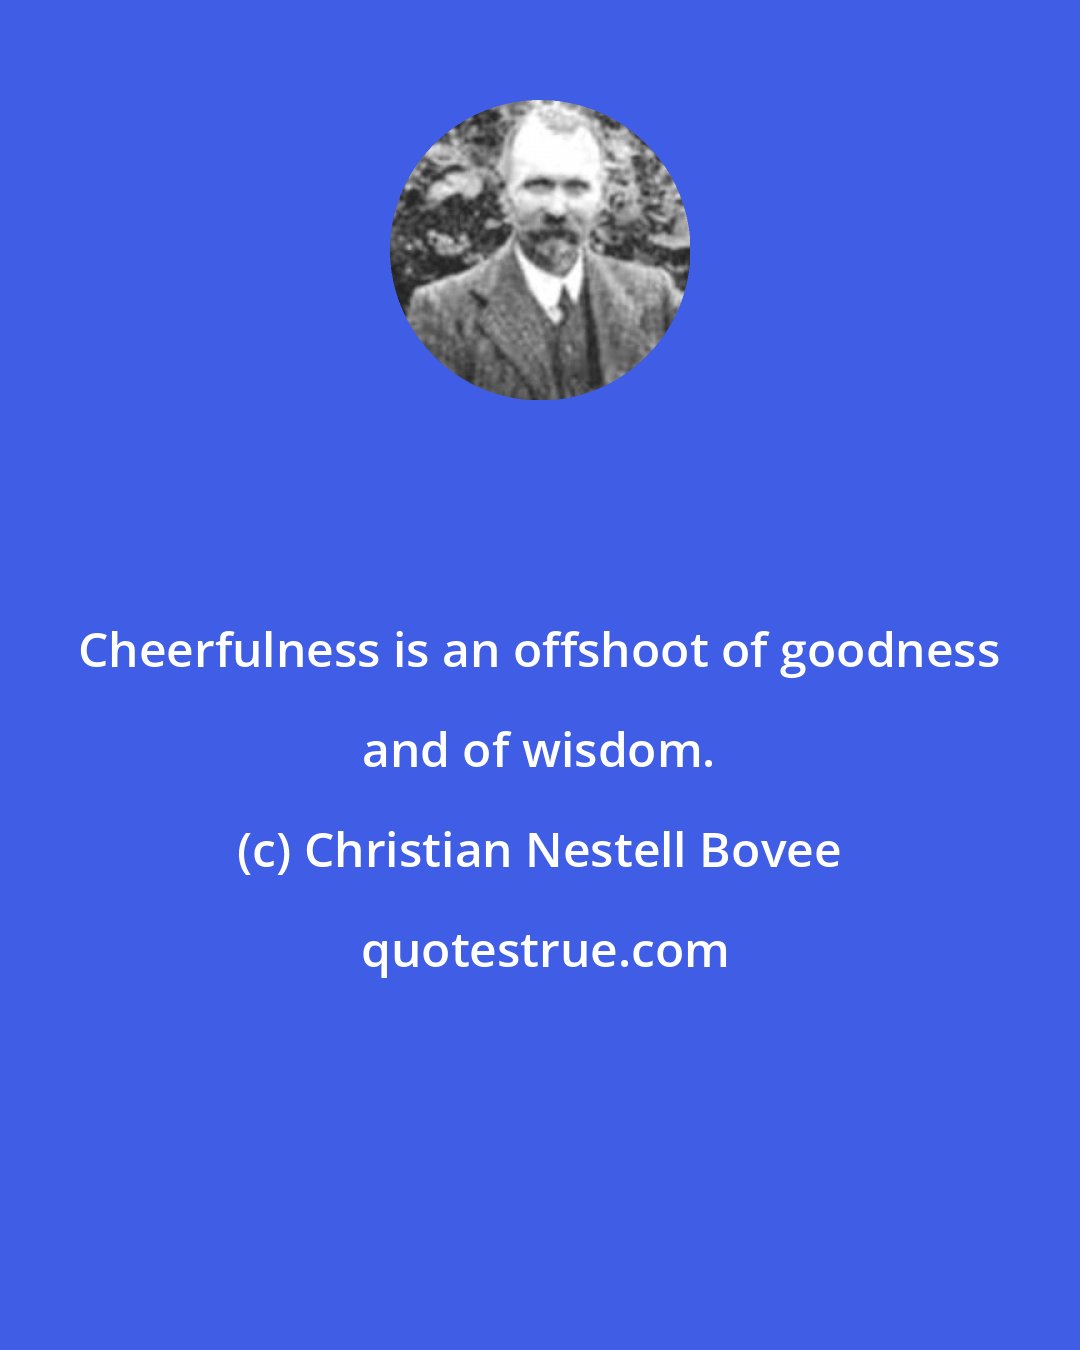 Christian Nestell Bovee: Cheerfulness is an offshoot of goodness and of wisdom.